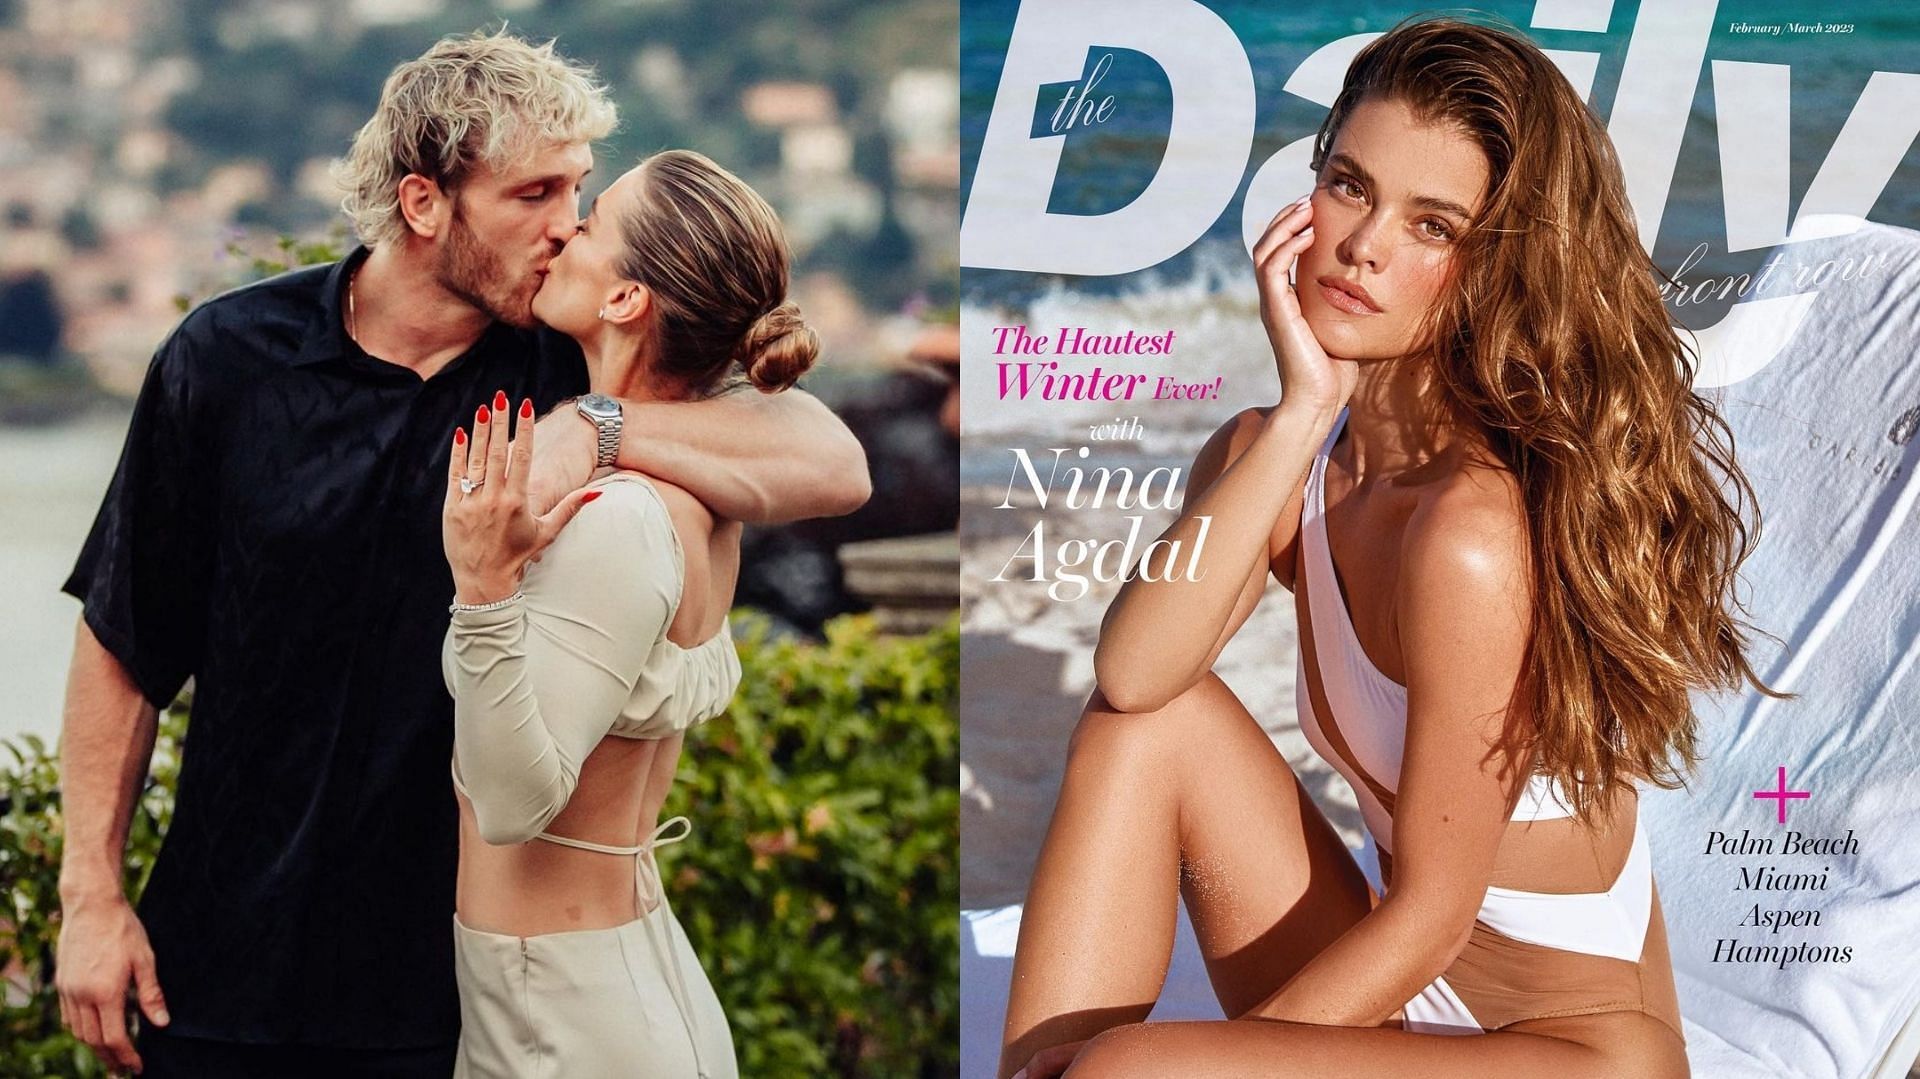 Logan Paul announces engagement to model Nina Agdal after year of dating